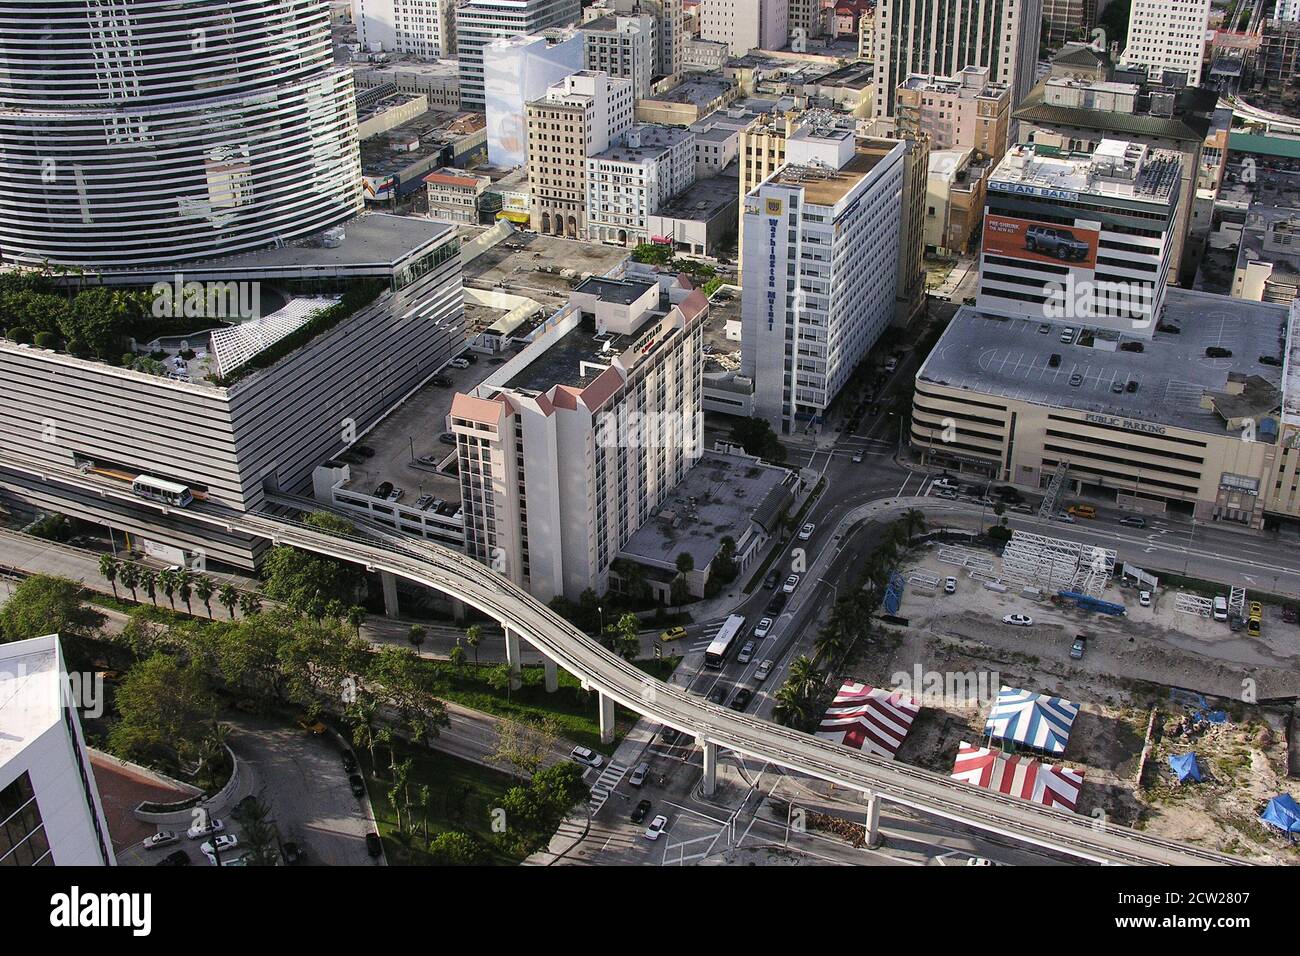 Miami, Florida, USA - September 2005:  Archival aerial view of the Miami People Mover and downtown buildings along SE 3rd Street. Stock Photo